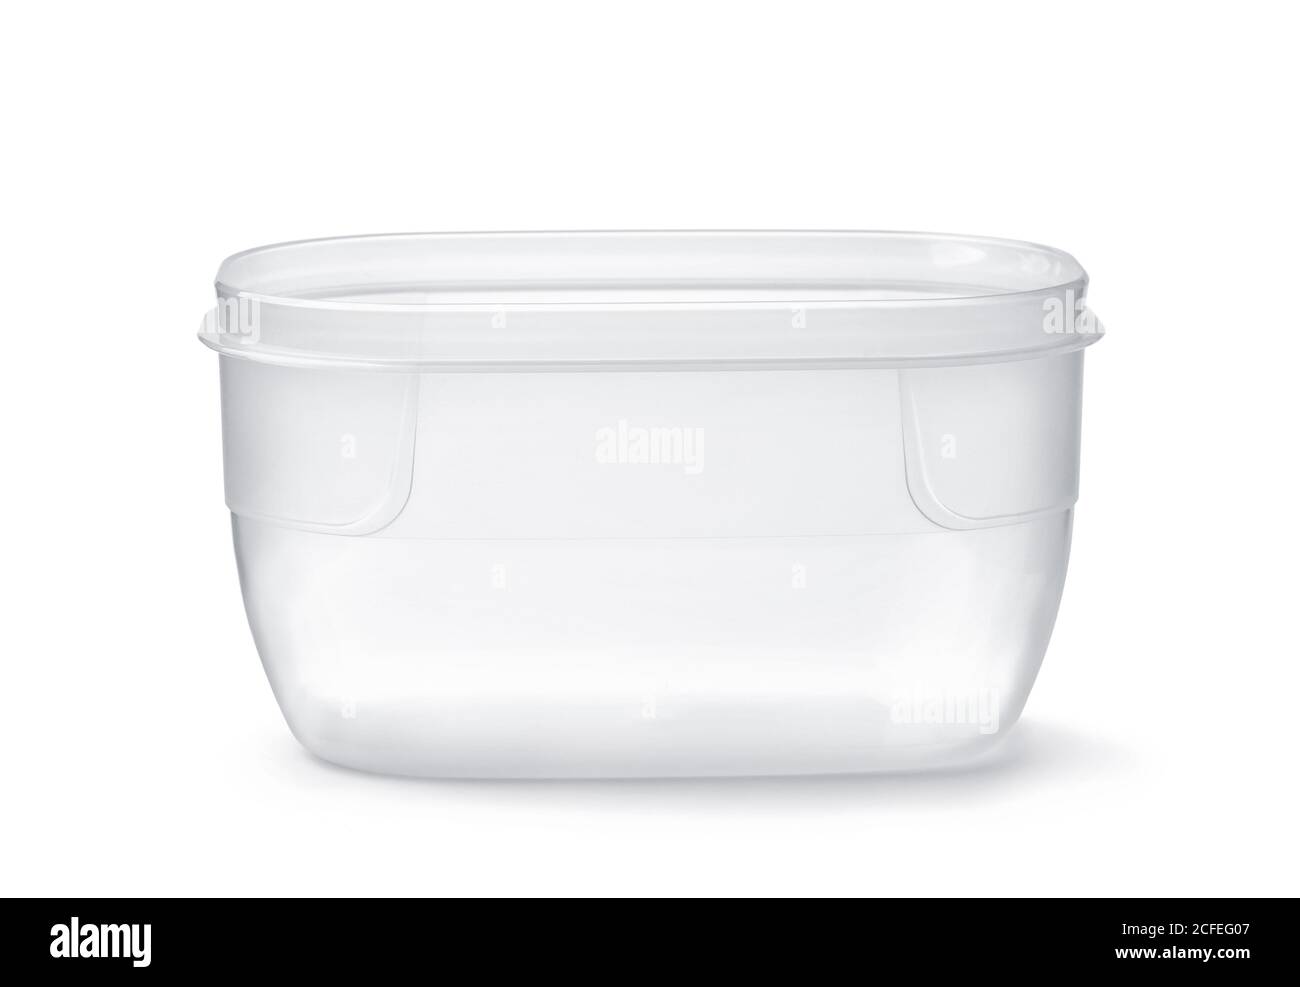 Front view of open transparent plastic food container isolated on white Stock Photo